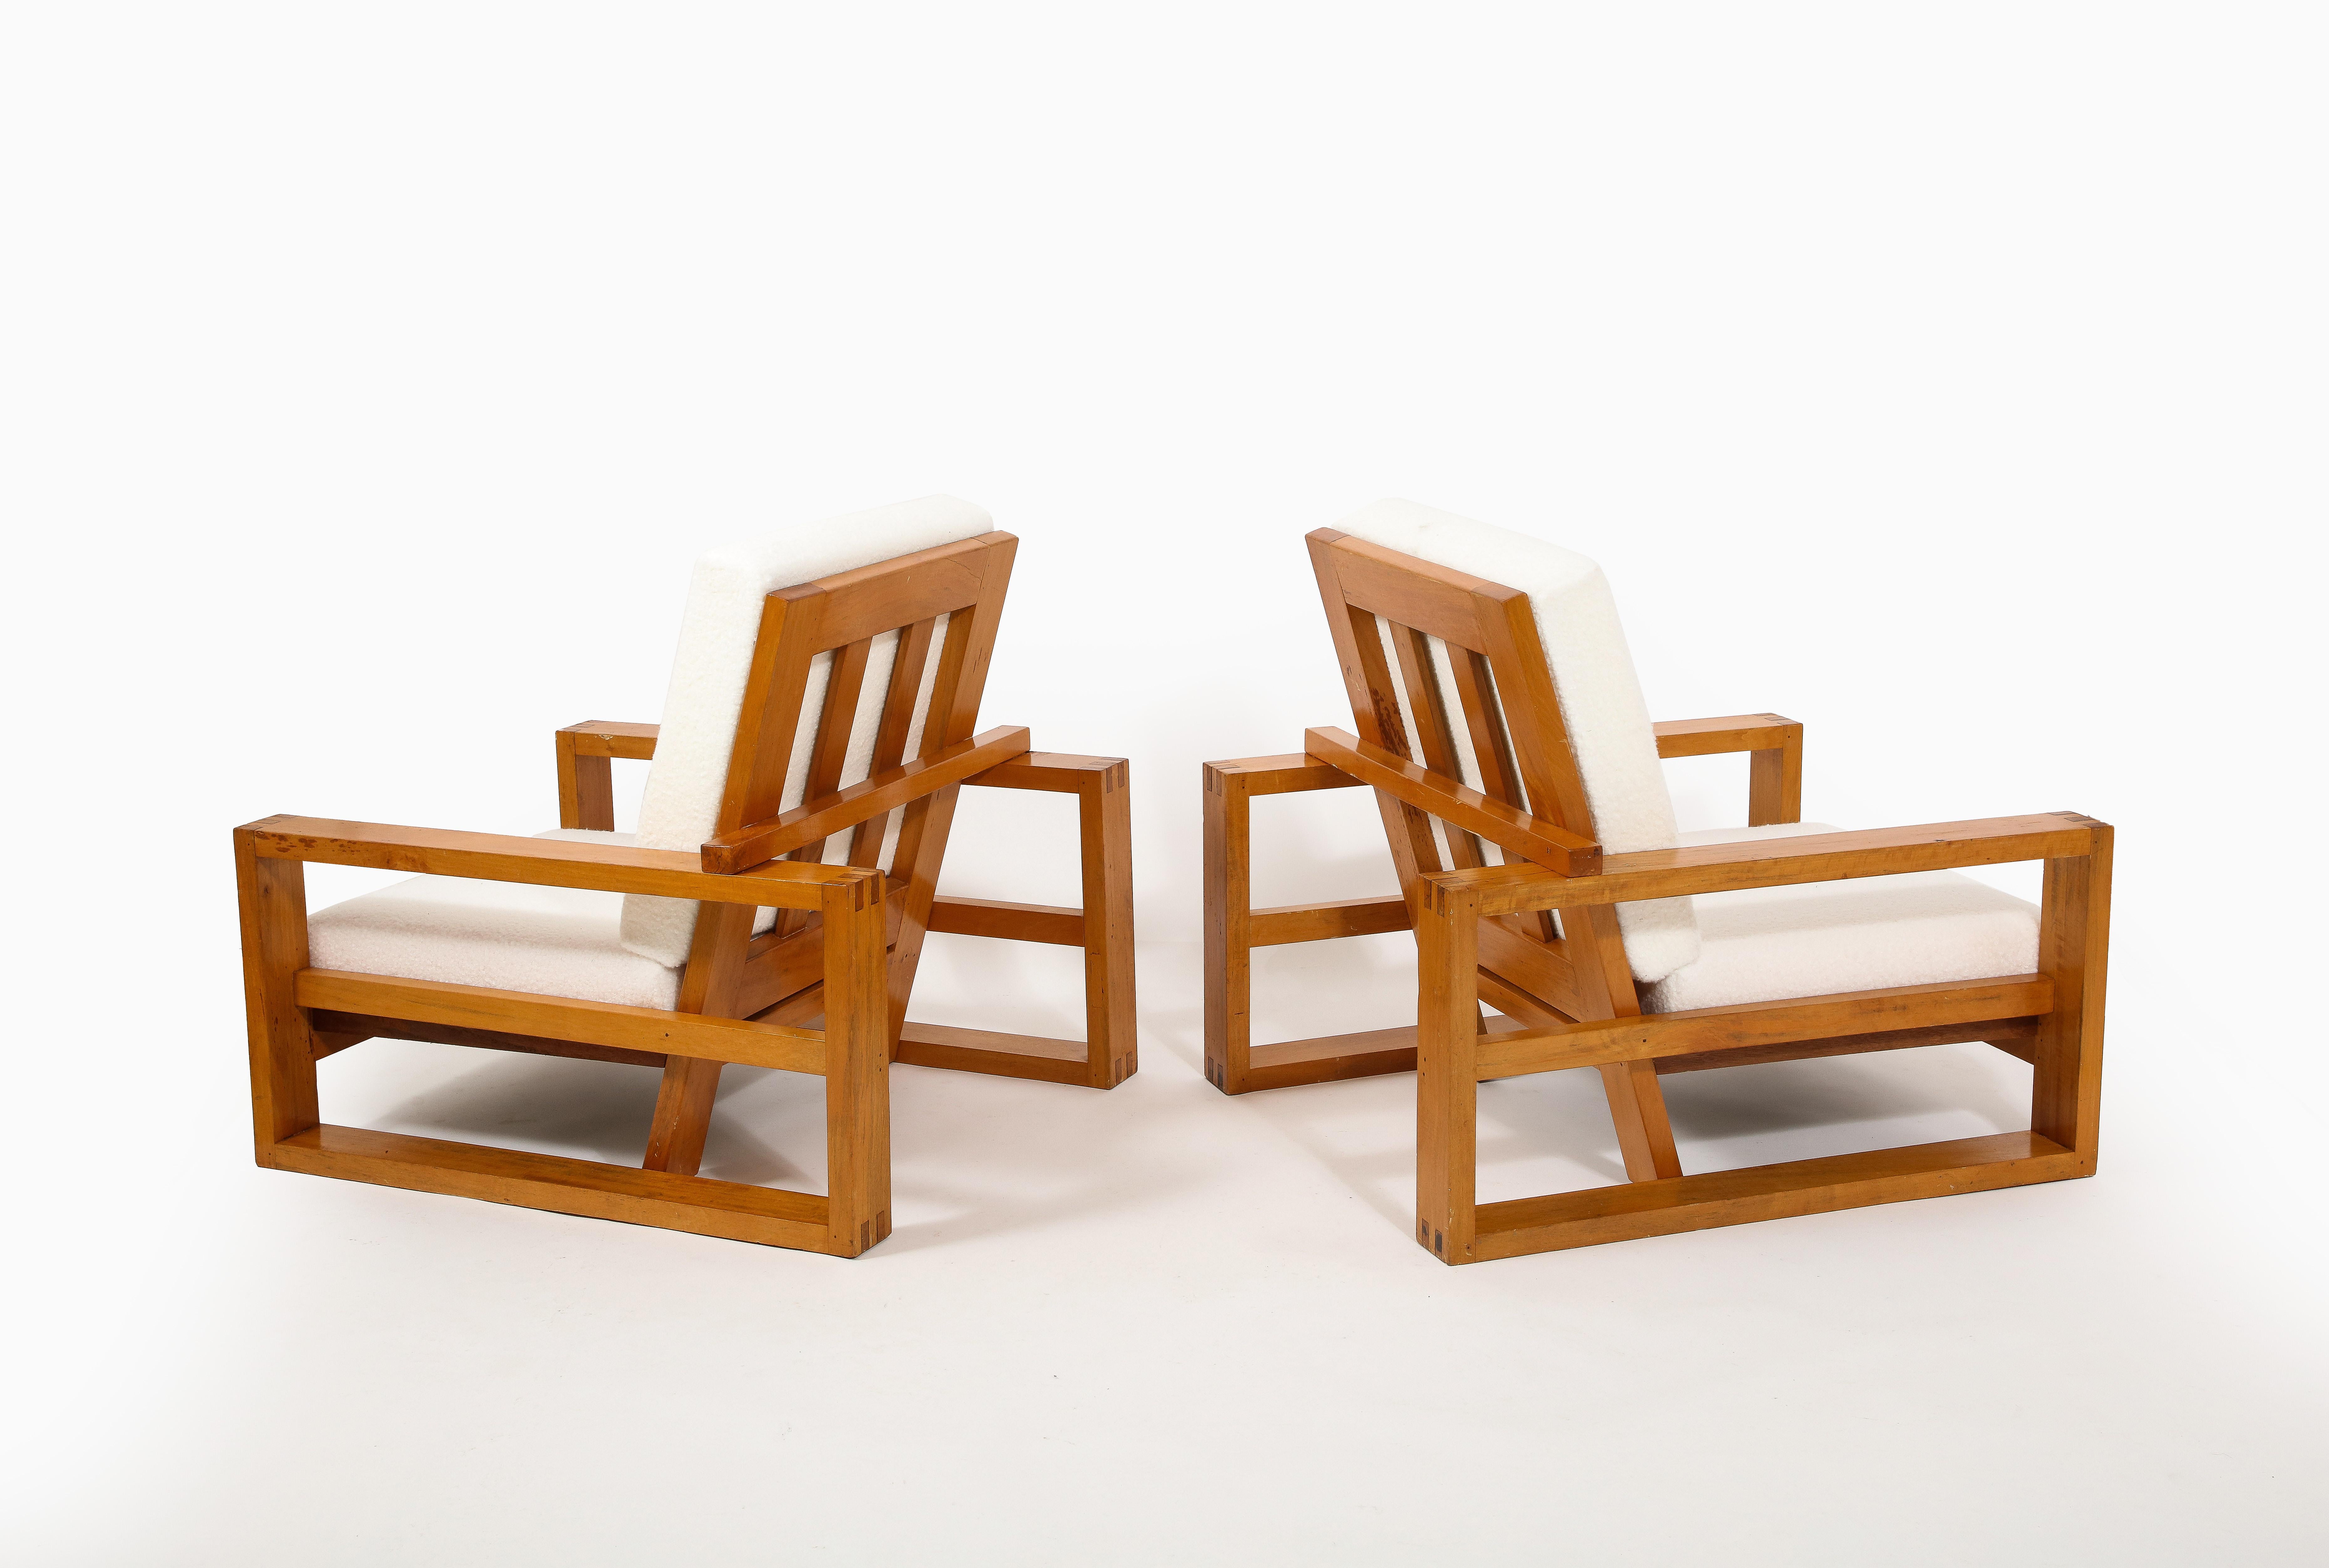 Maison Regain Large Pair of Lounge Chairs, France 1960's For Sale 4